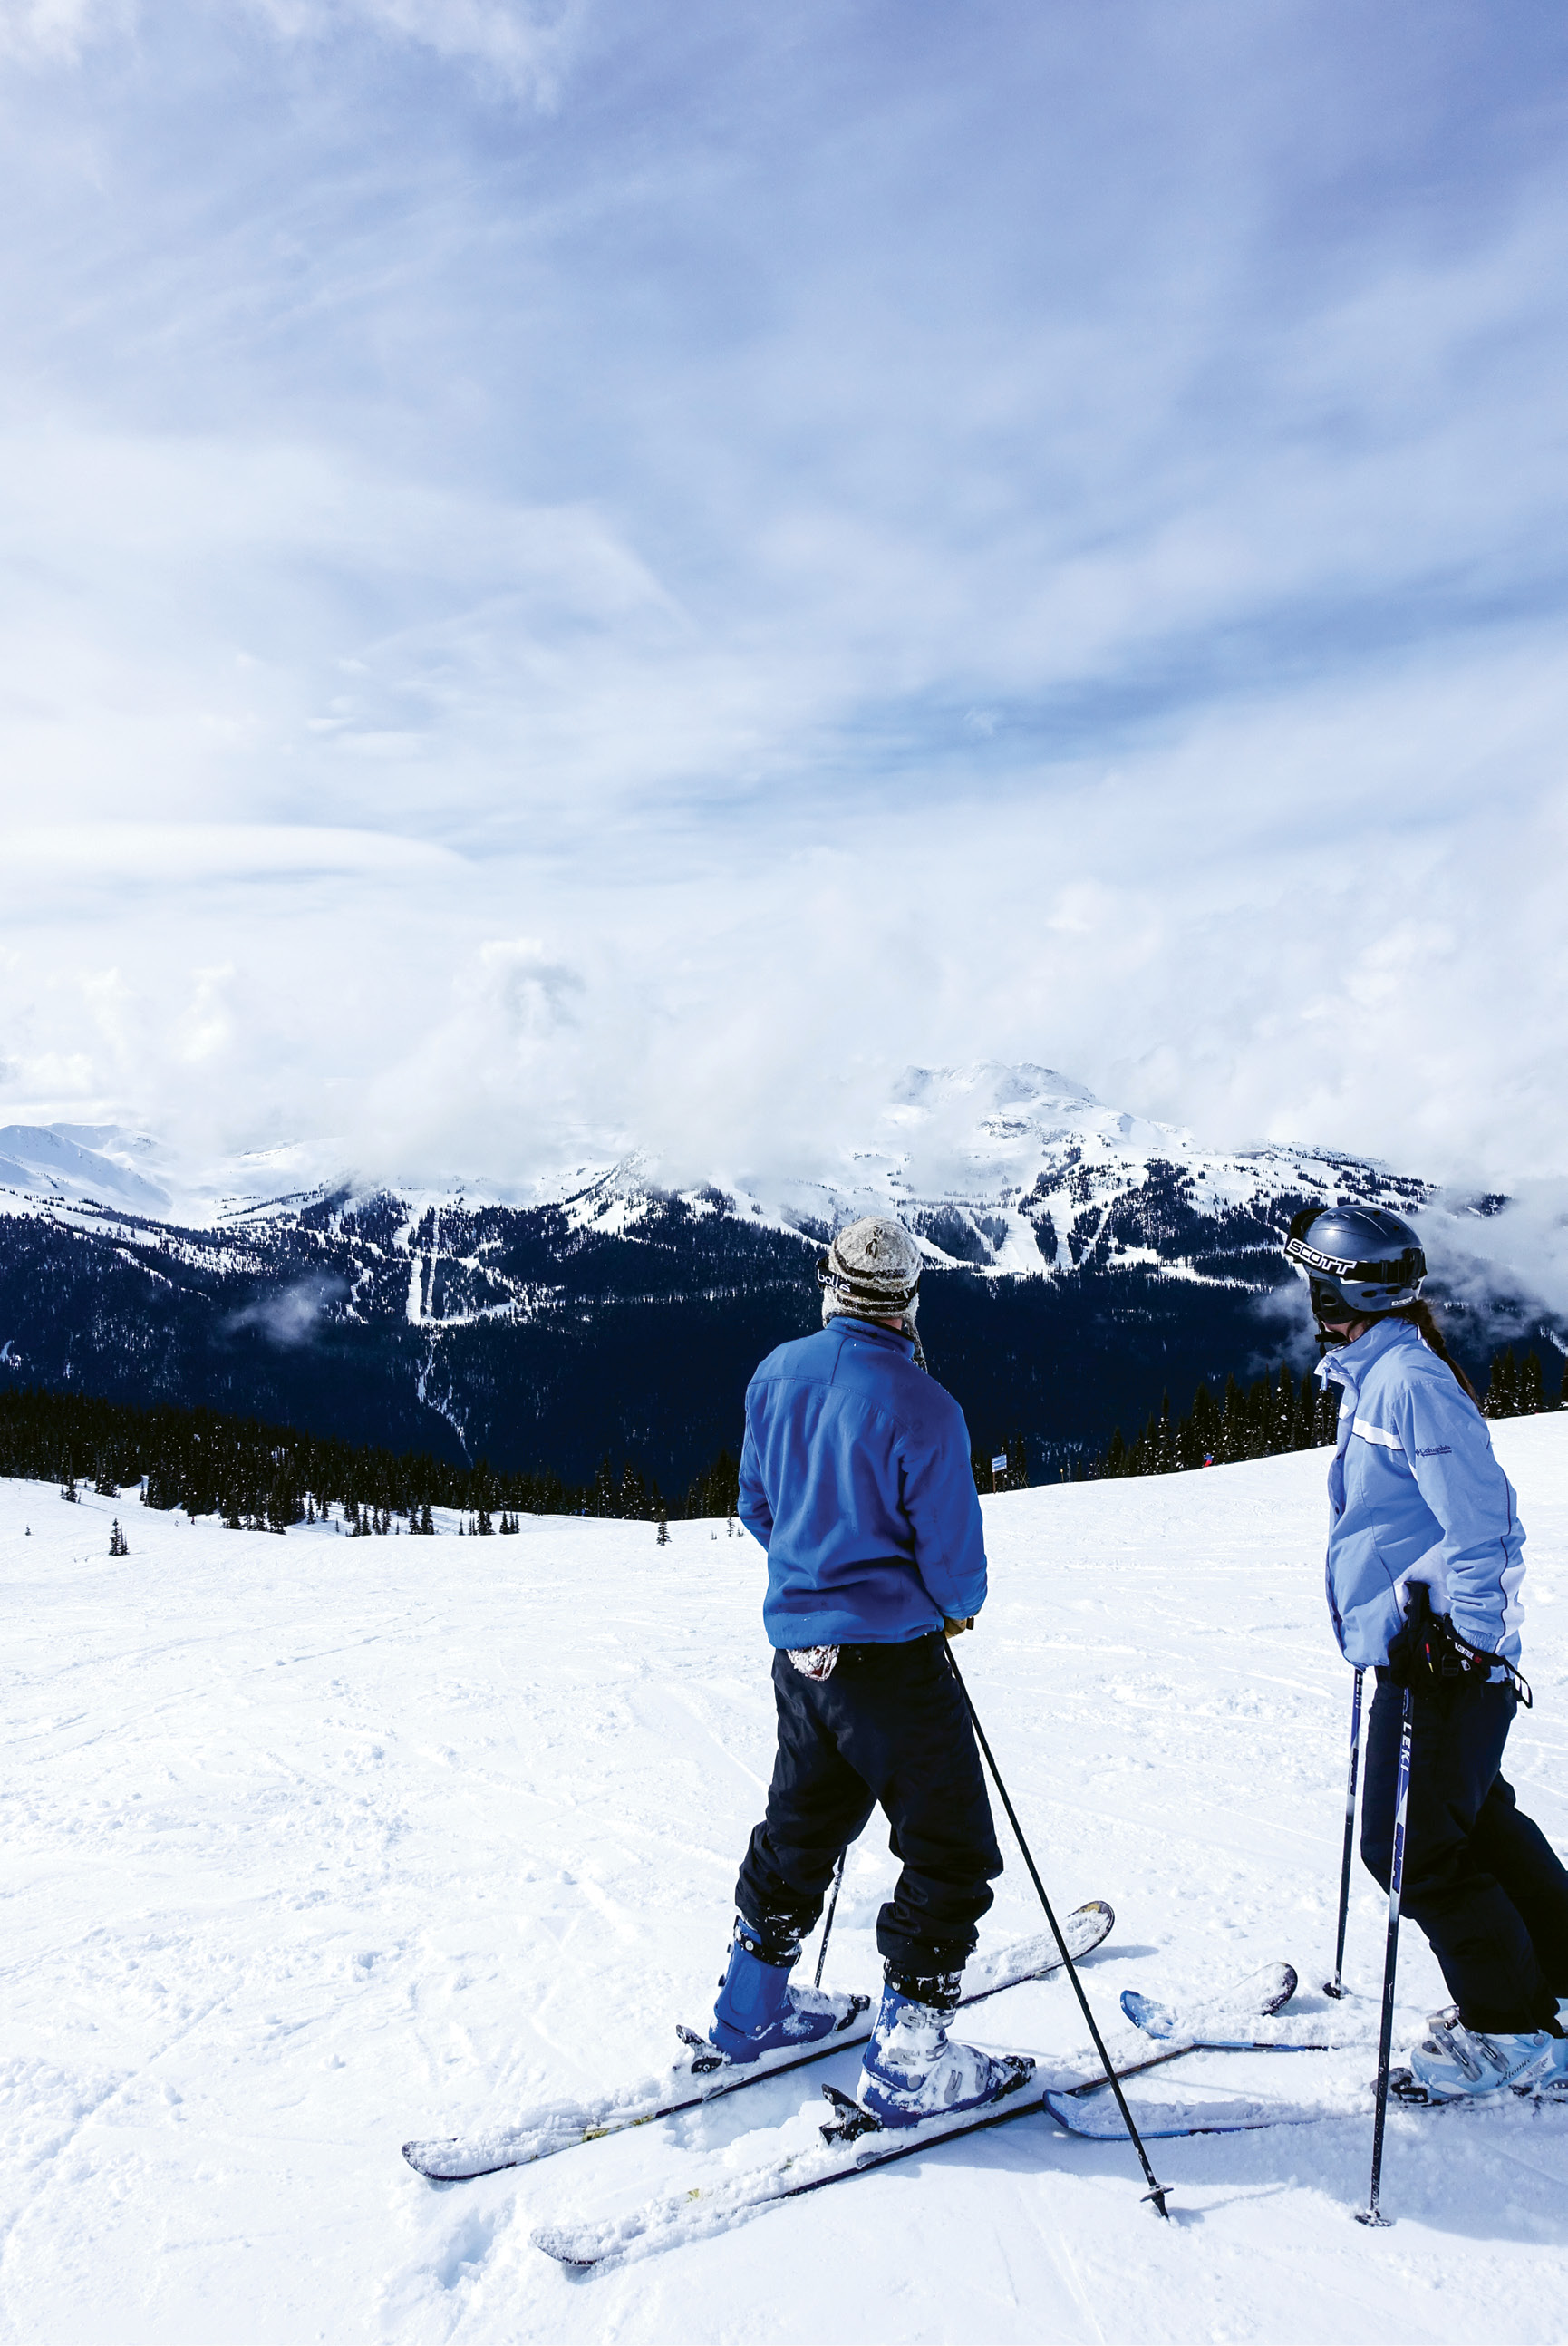 Two Mountains, One Resort: Charleston-born Hank Rudolph V and a friend stand atop a run on Blackcomb Peak and take in the view of Whistler Mountain across the valley, accessible by an awe-inspiring gondola ride.